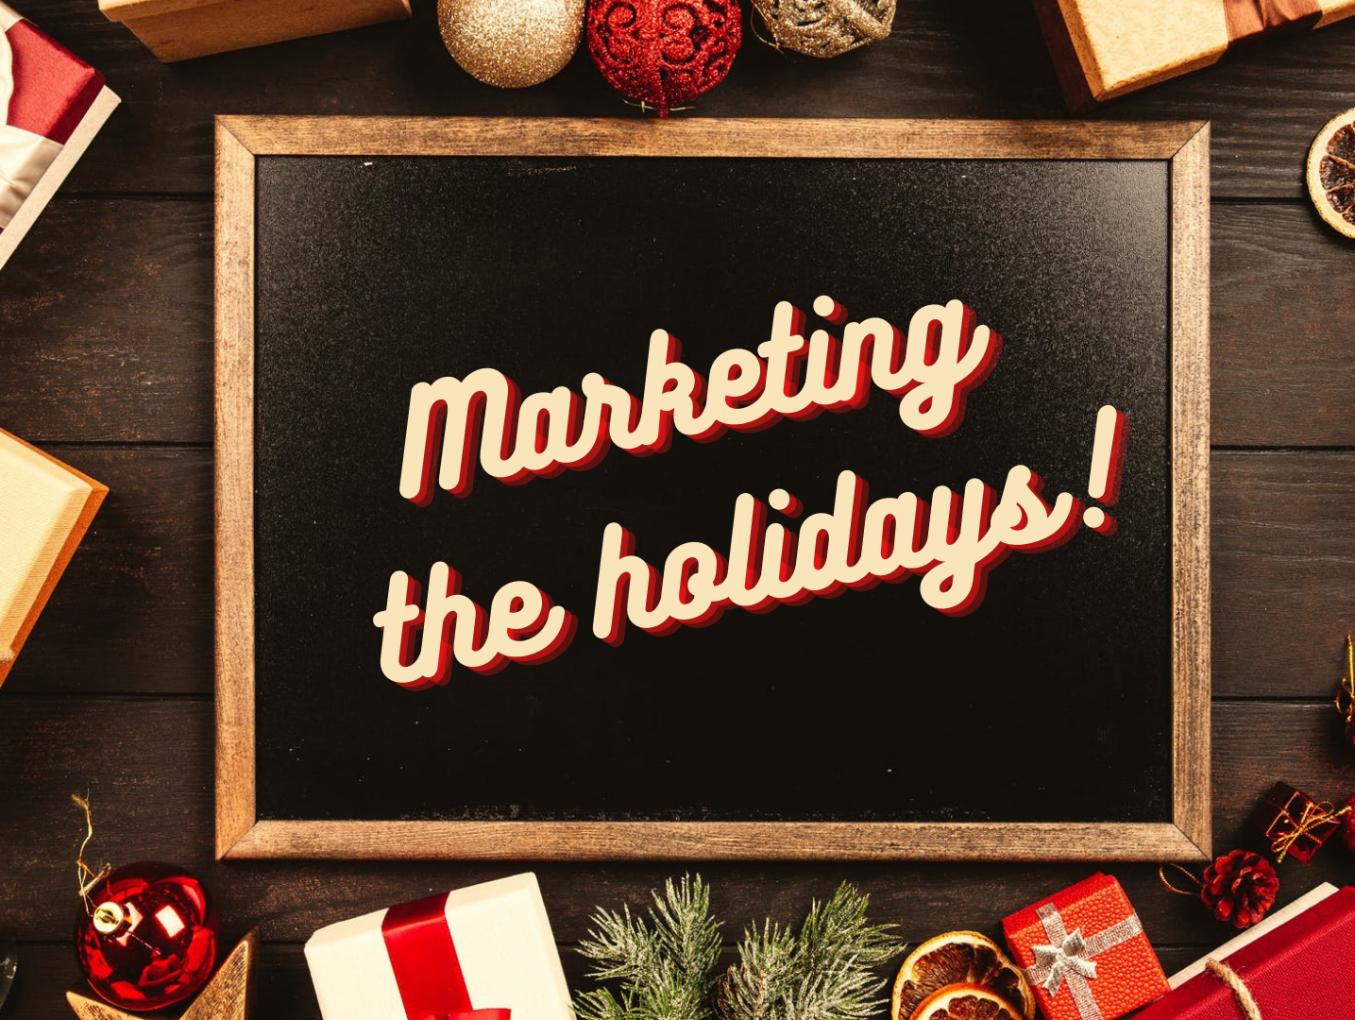 Marketing the holidays: 5 quick and easy ways you can reach customers this holiday season